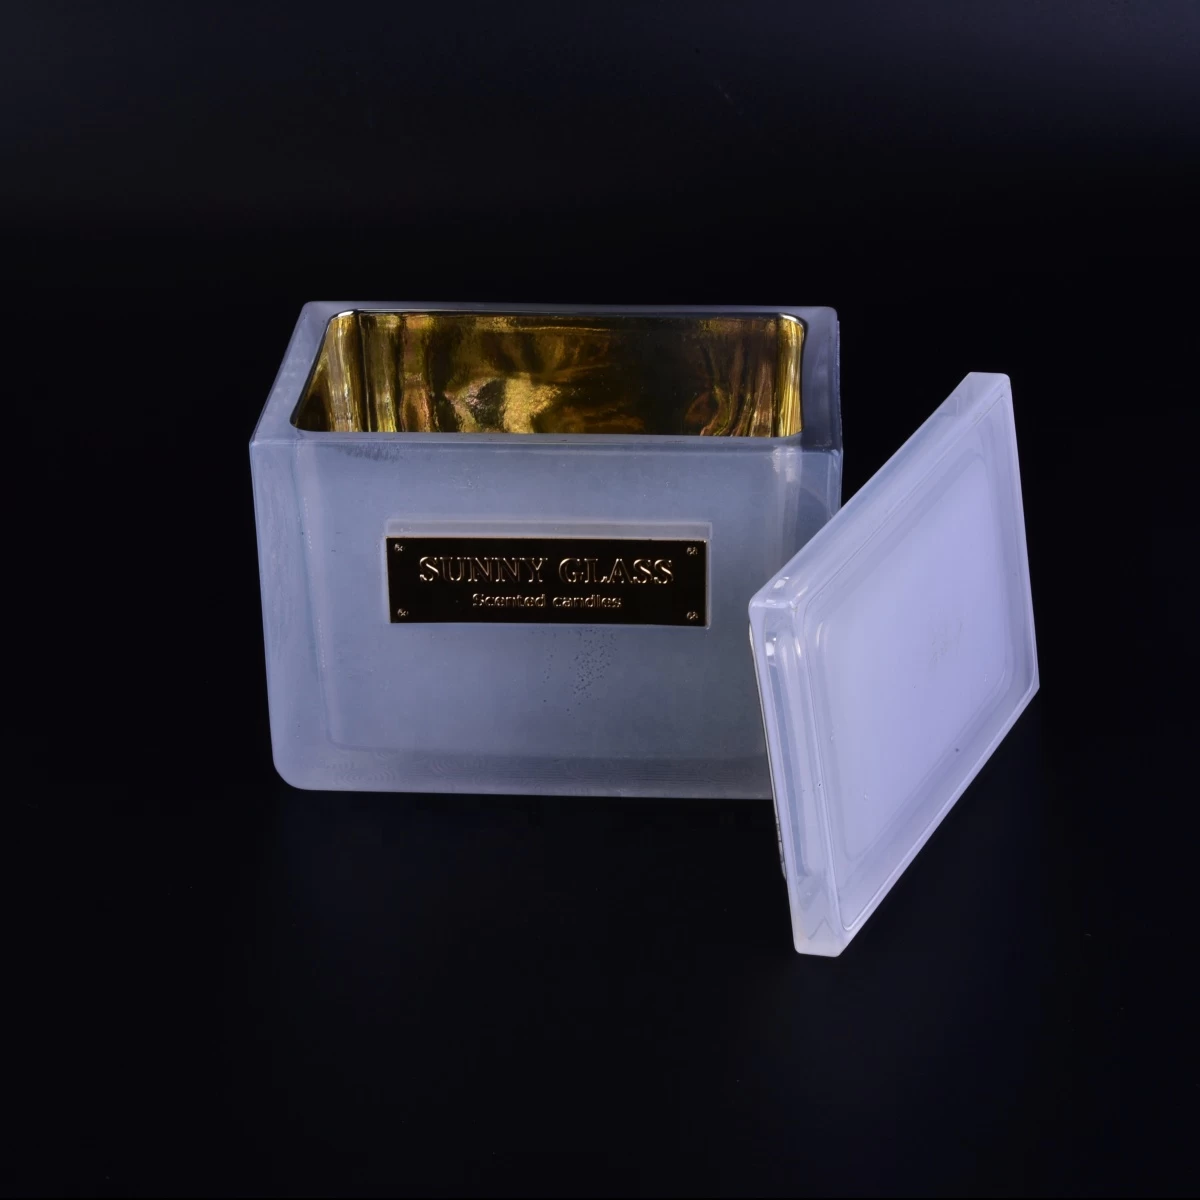 Square white scented luxury home decorative glass candle jars